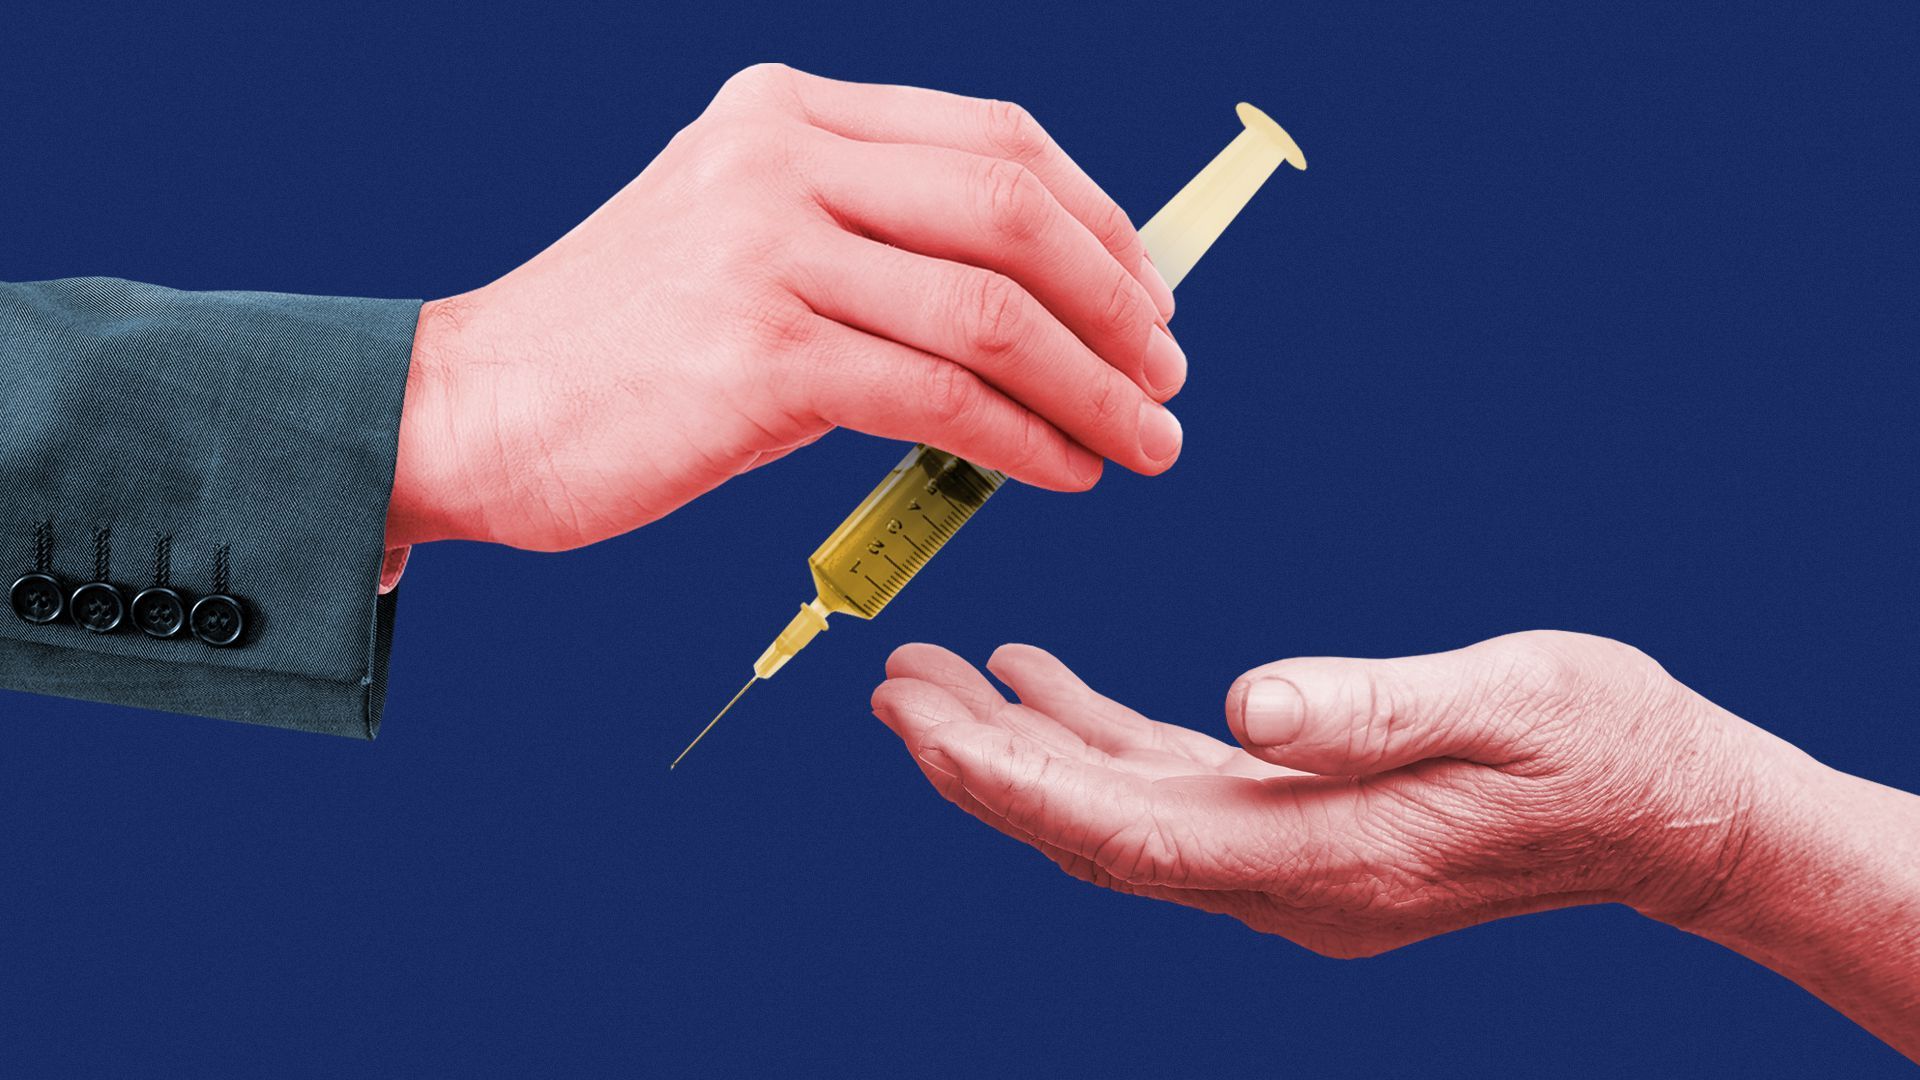 Illustration of a person handing a vaccine syringe to an older person